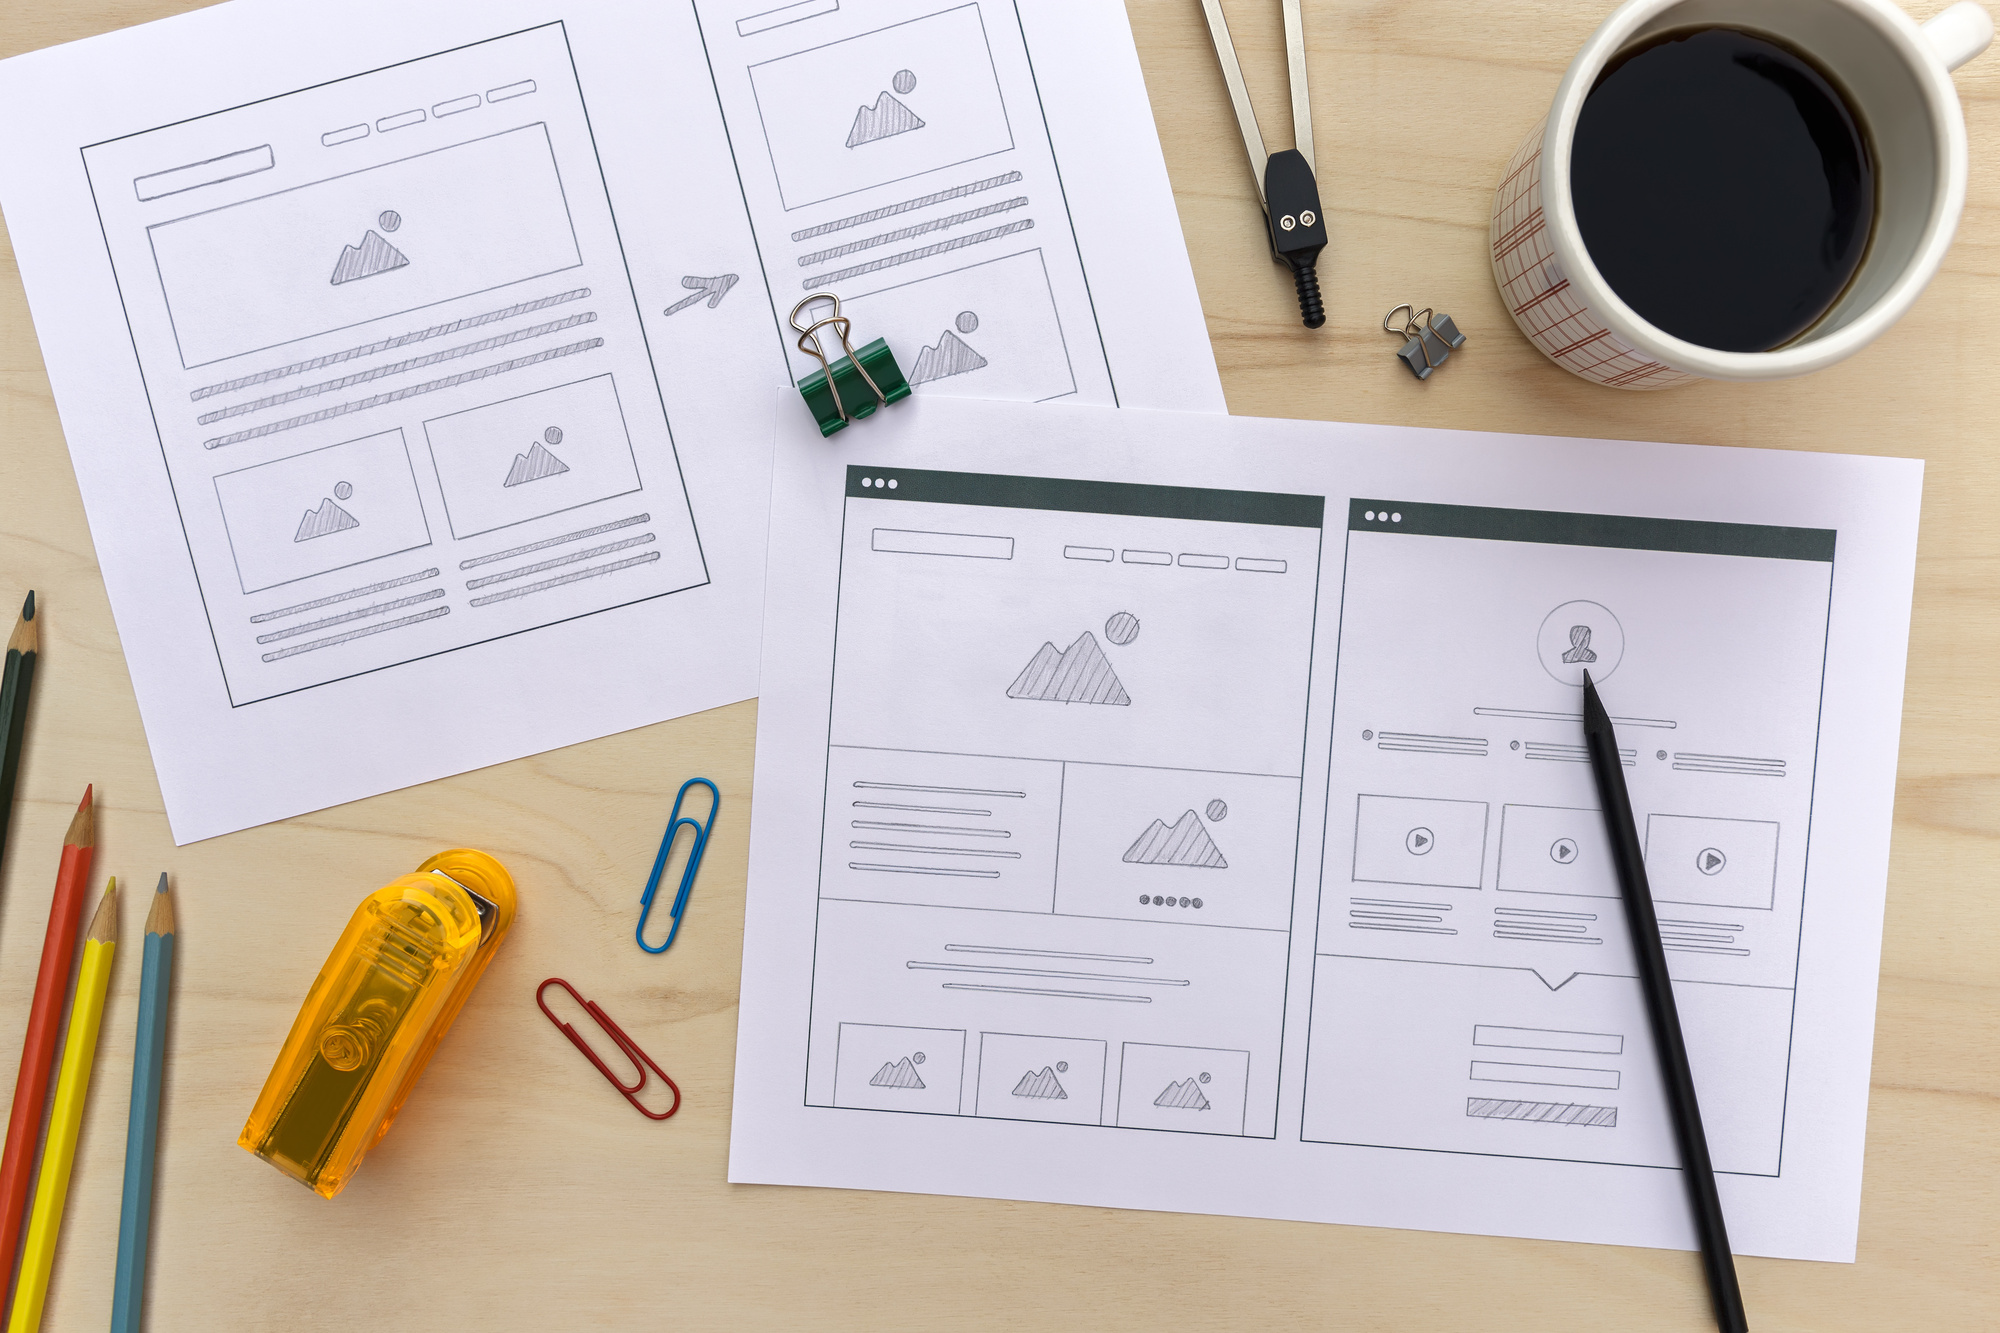 Planning the Site Layout: How to Make a Wireframe